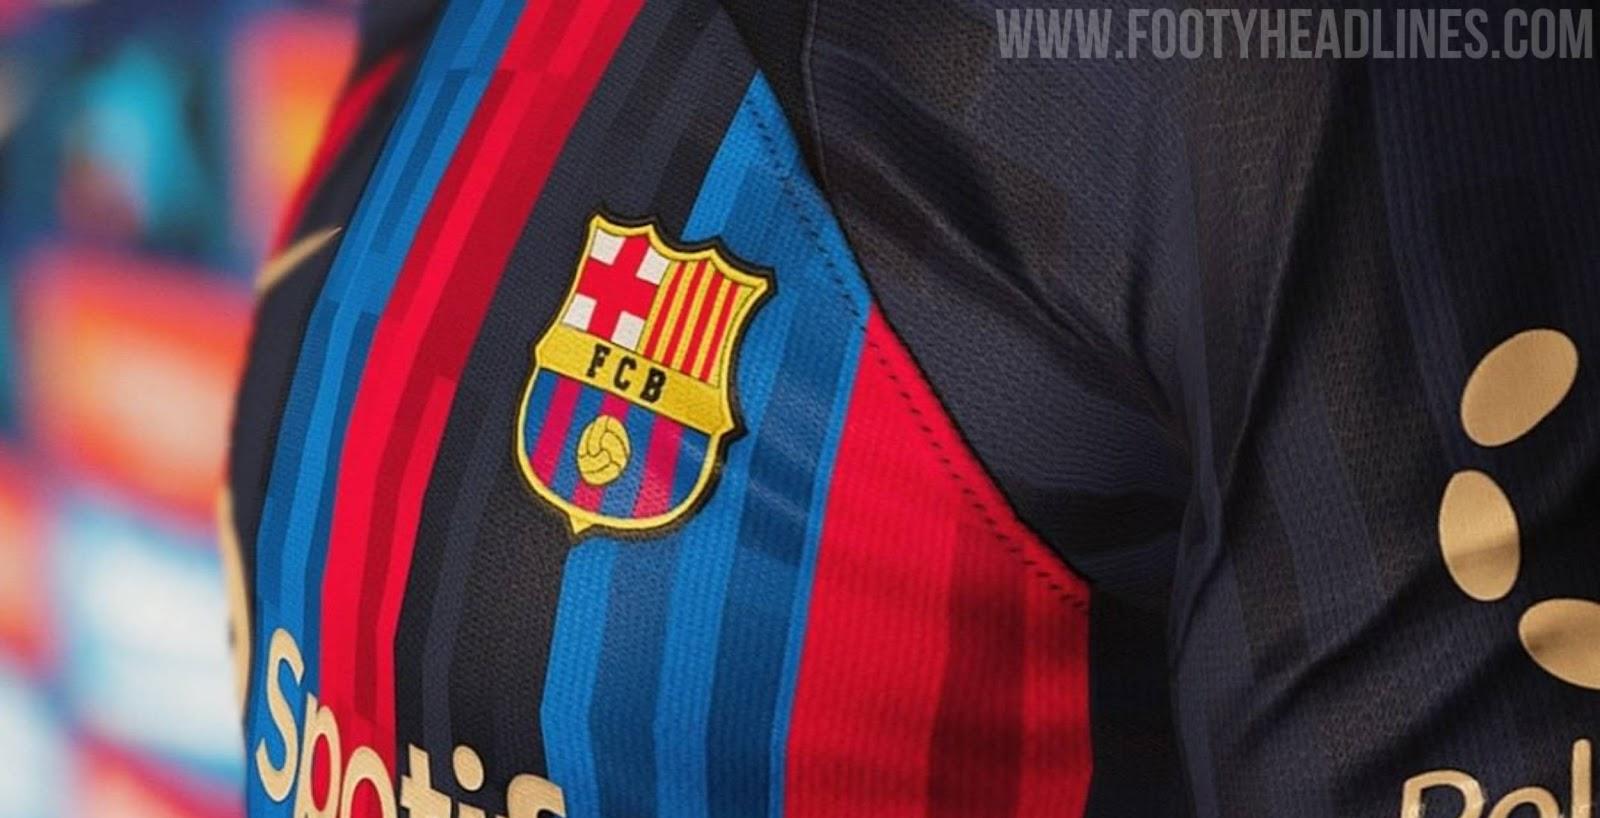 Incredible Leaked Image Of Fc Barcelona Home Kit Is Render